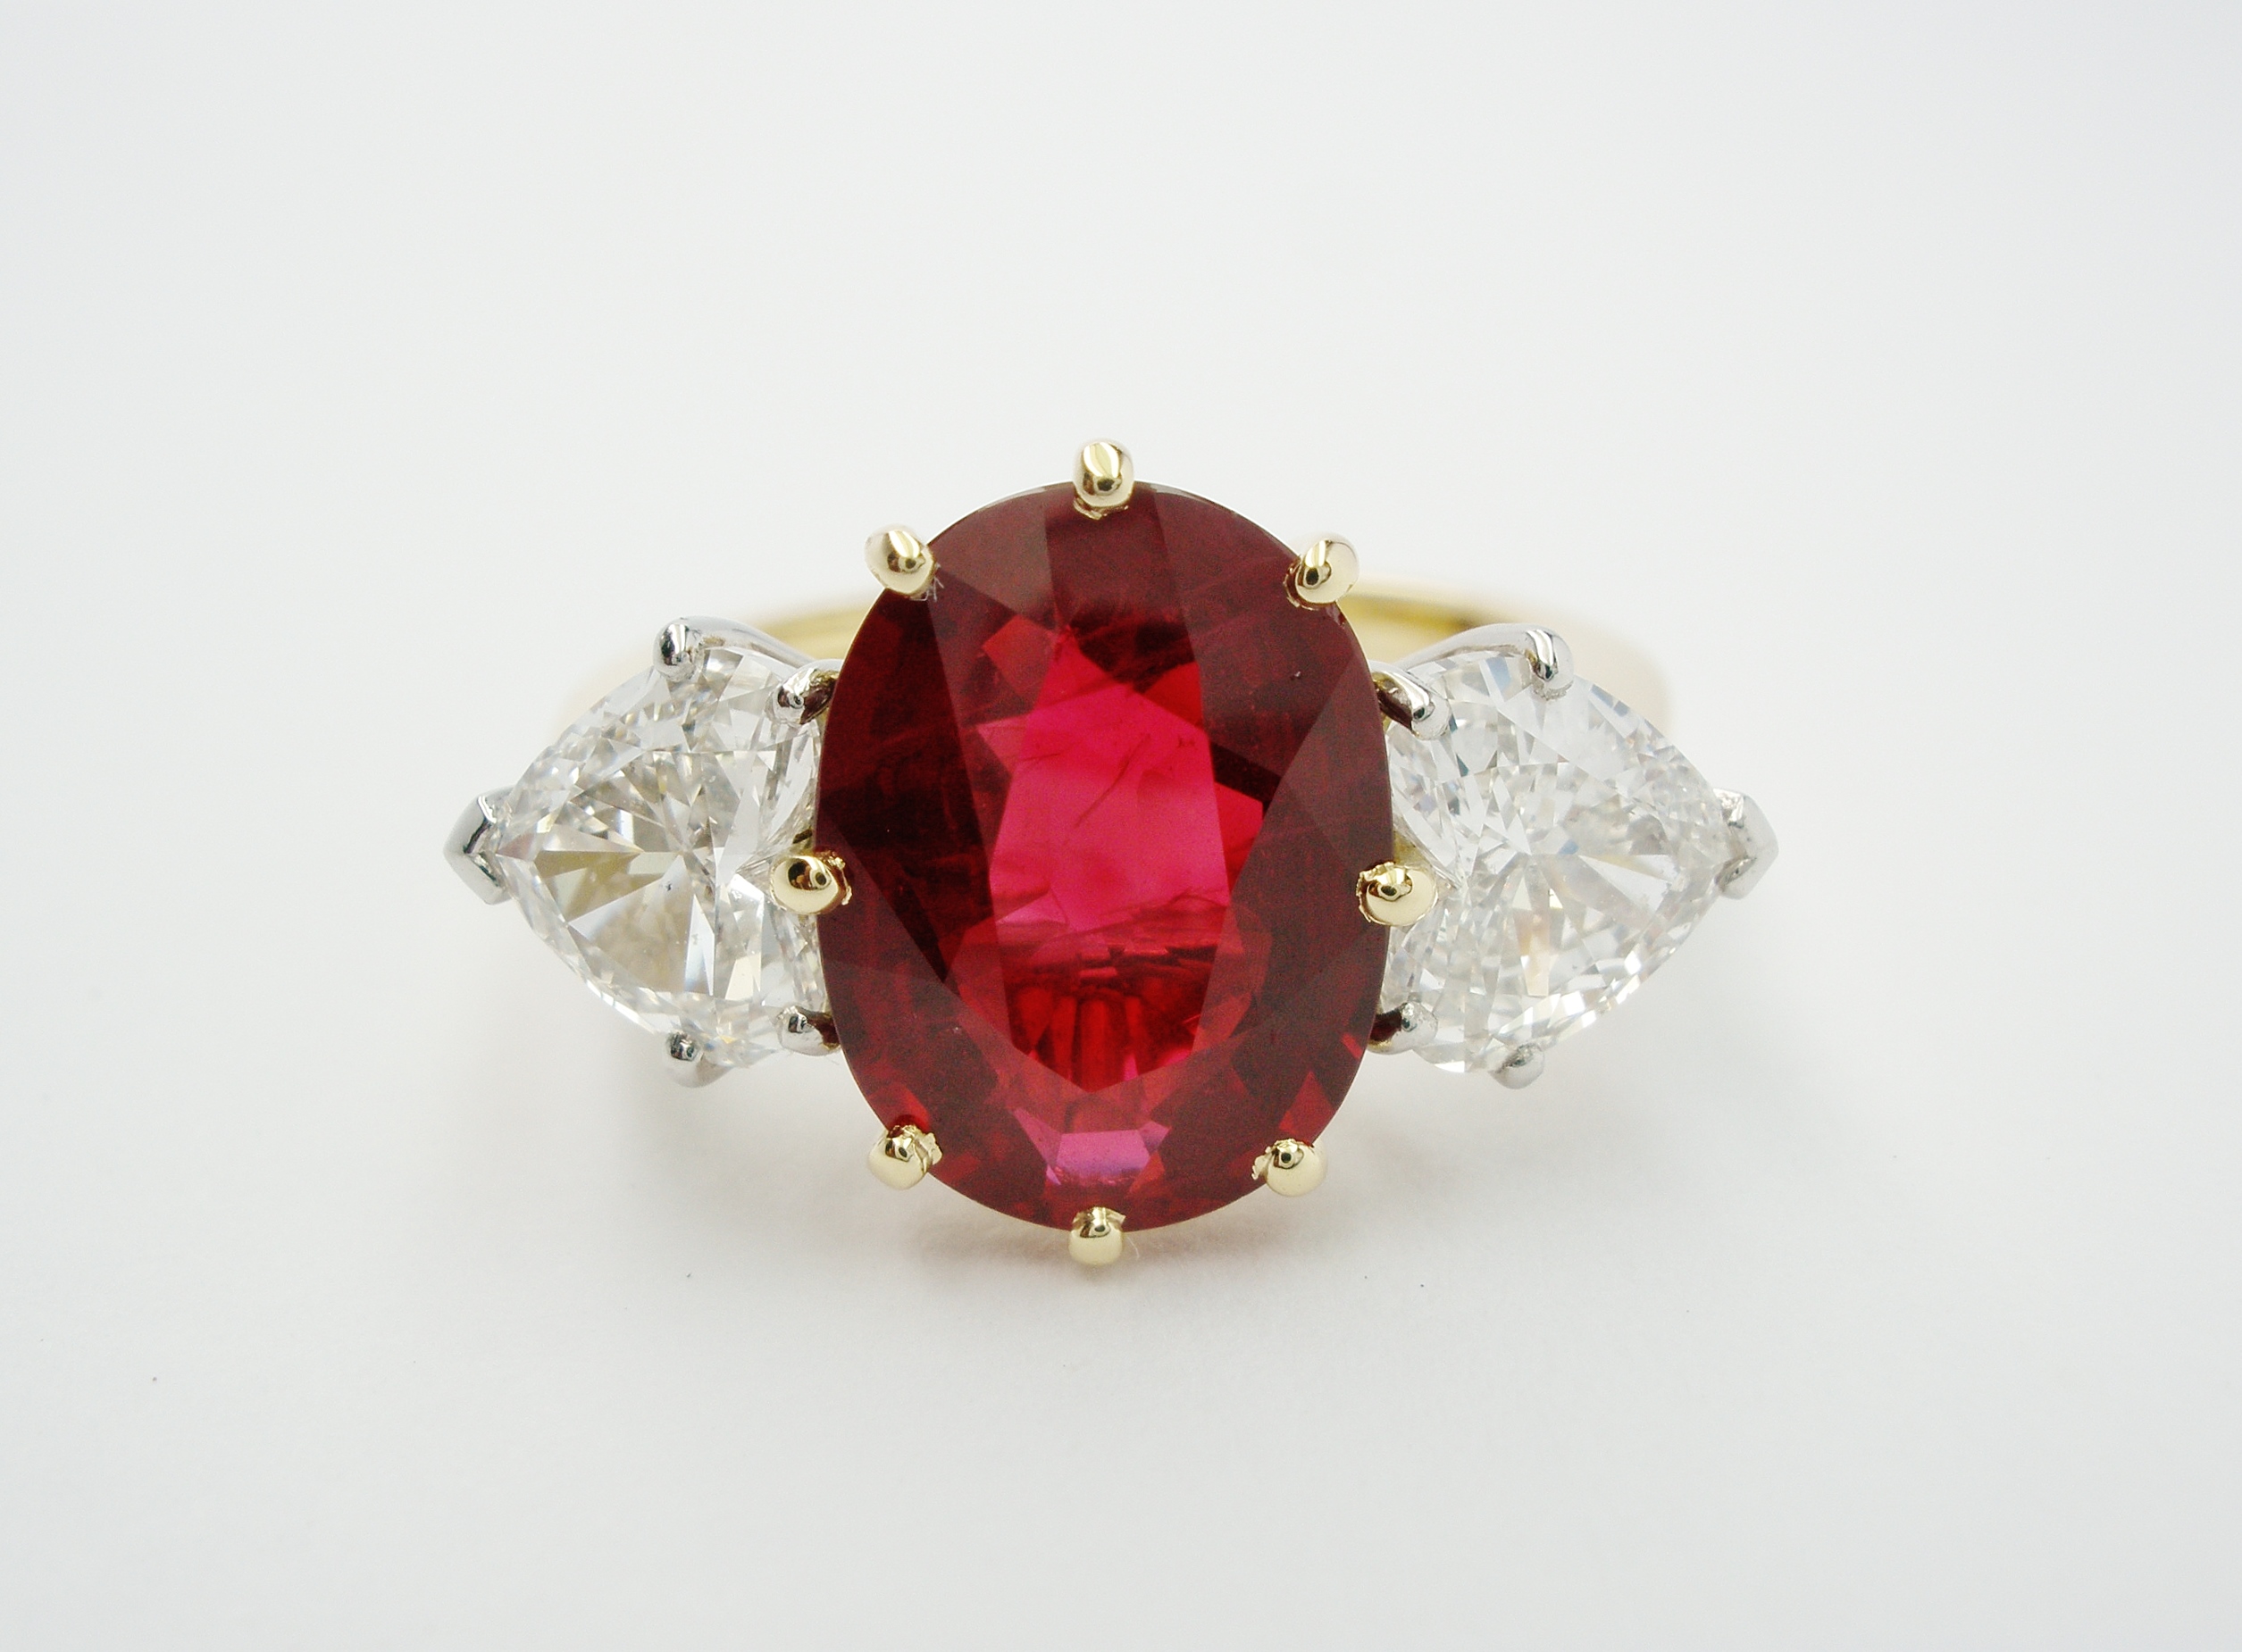 2.38ct super fine, pigeon blood red, oval Ruby with a pair of 0.75ct 'D' colour heart shaped diamonds. Ideal ruby size 1.00ct to 3.00ct Heart diamonds in proportion to ruby.